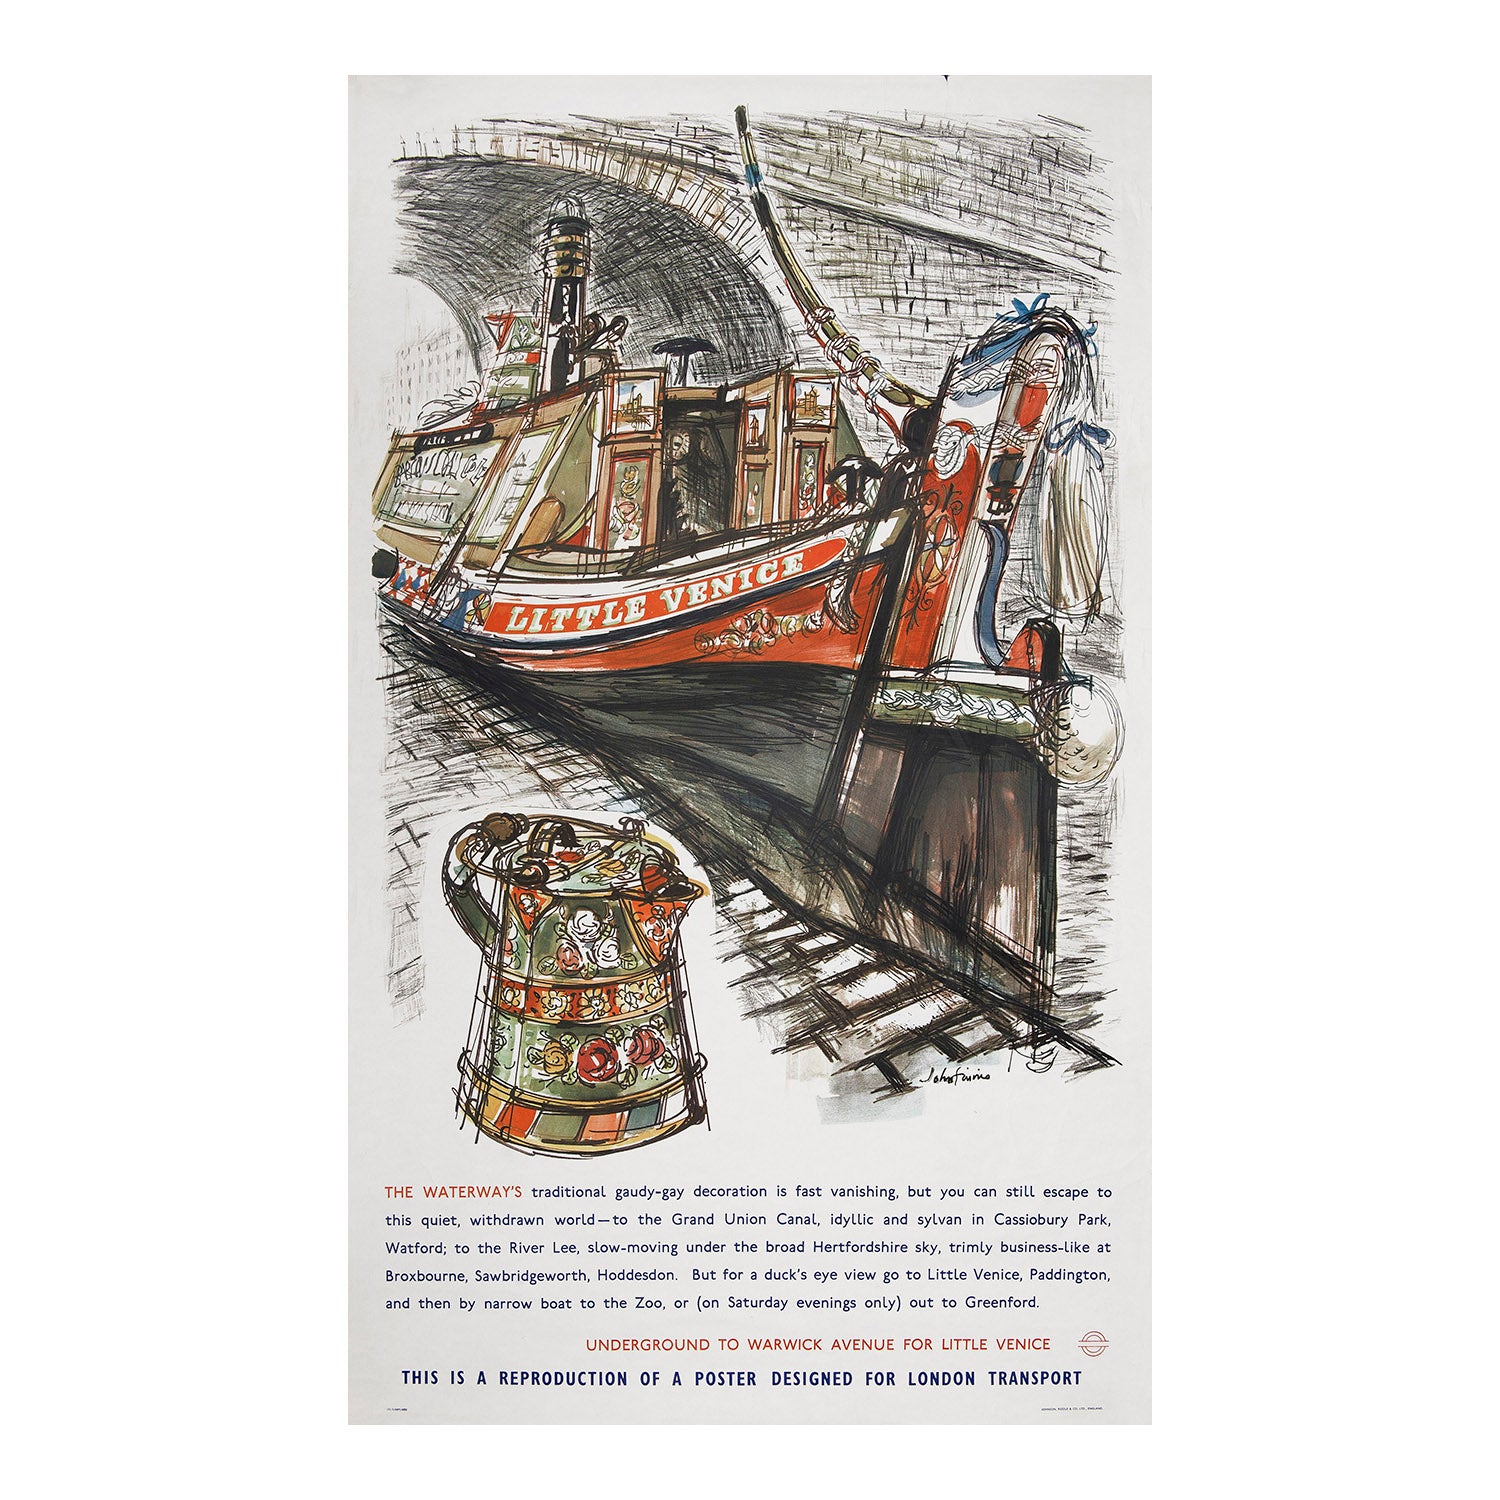 Original London Transport poster promoting daytrips to Little Venice, a district in West London near Grand Union Canal and the Regent's Canal. The painting, by John Finnie, features a highly decorated canal narrow boat characteristic of the area. 